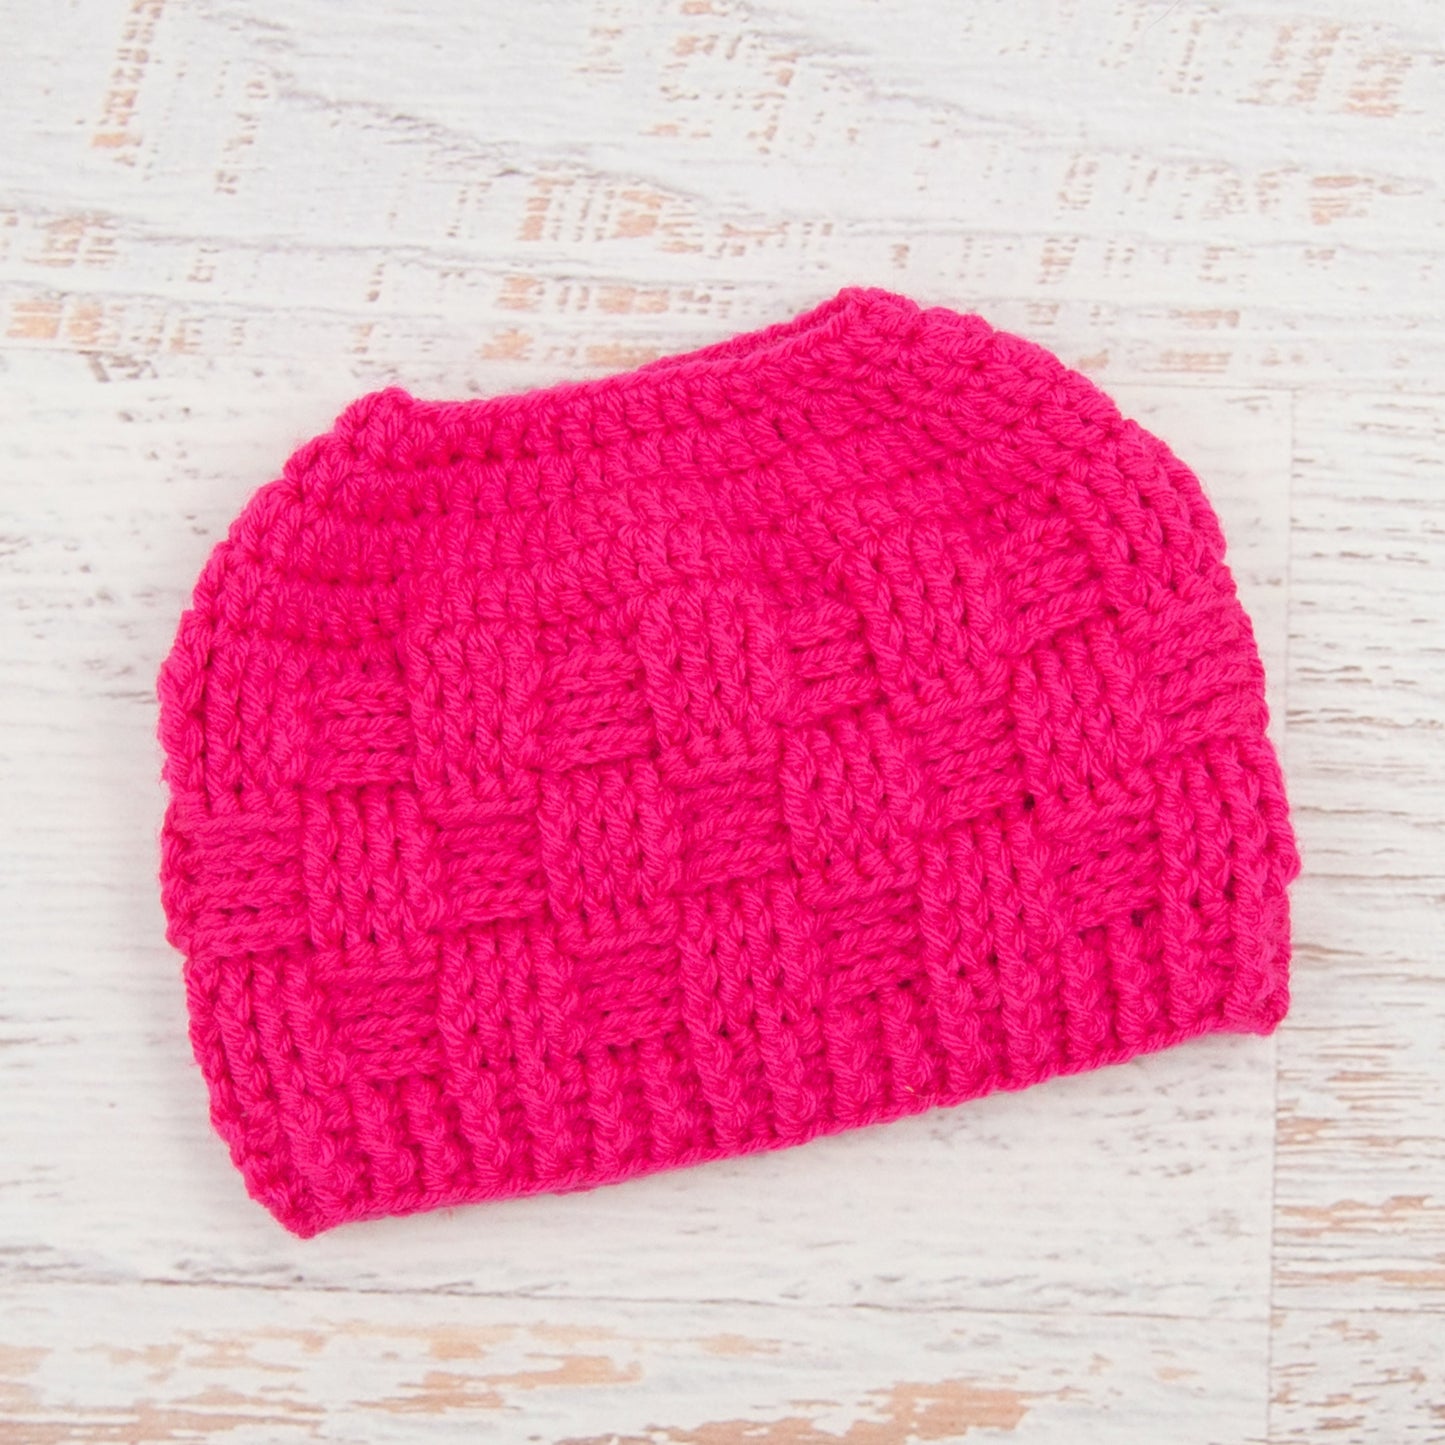 In-Stock The 'Everyday' Messy Bun Hat in Rose Shocking